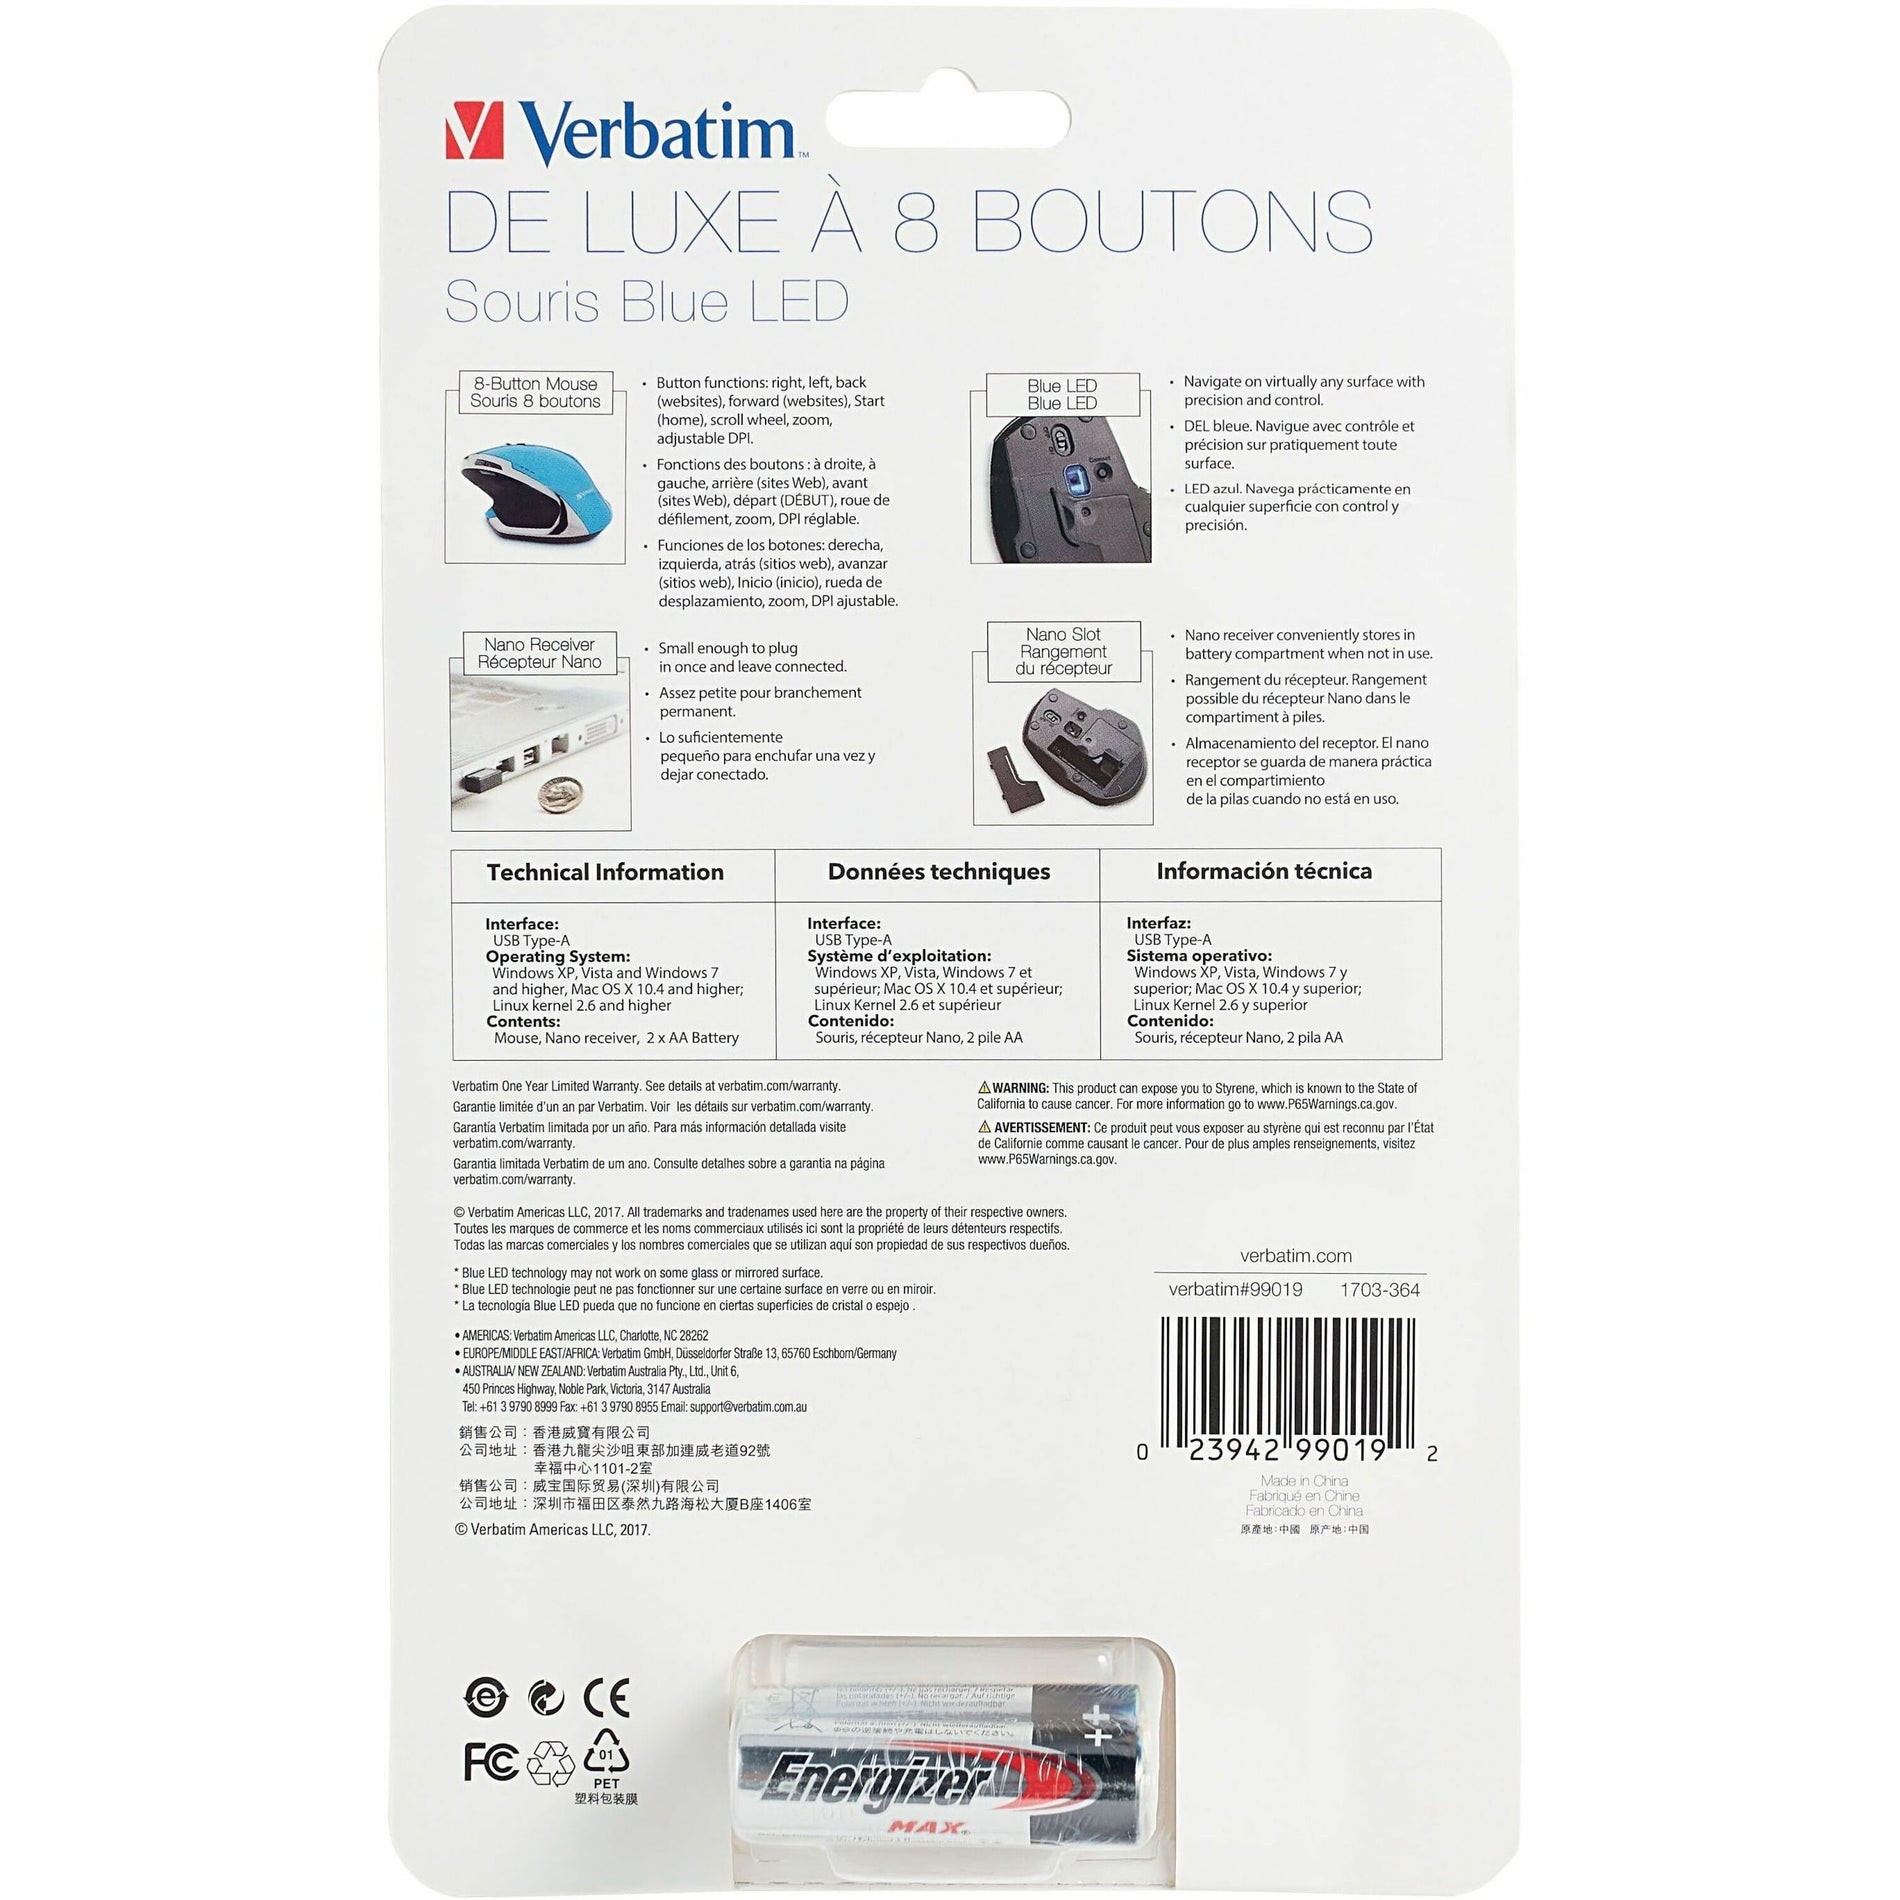 Verbatim 99019 Wireless Desktop 8-Button Deluxe Mouse, Blue LED, Radio Frequency